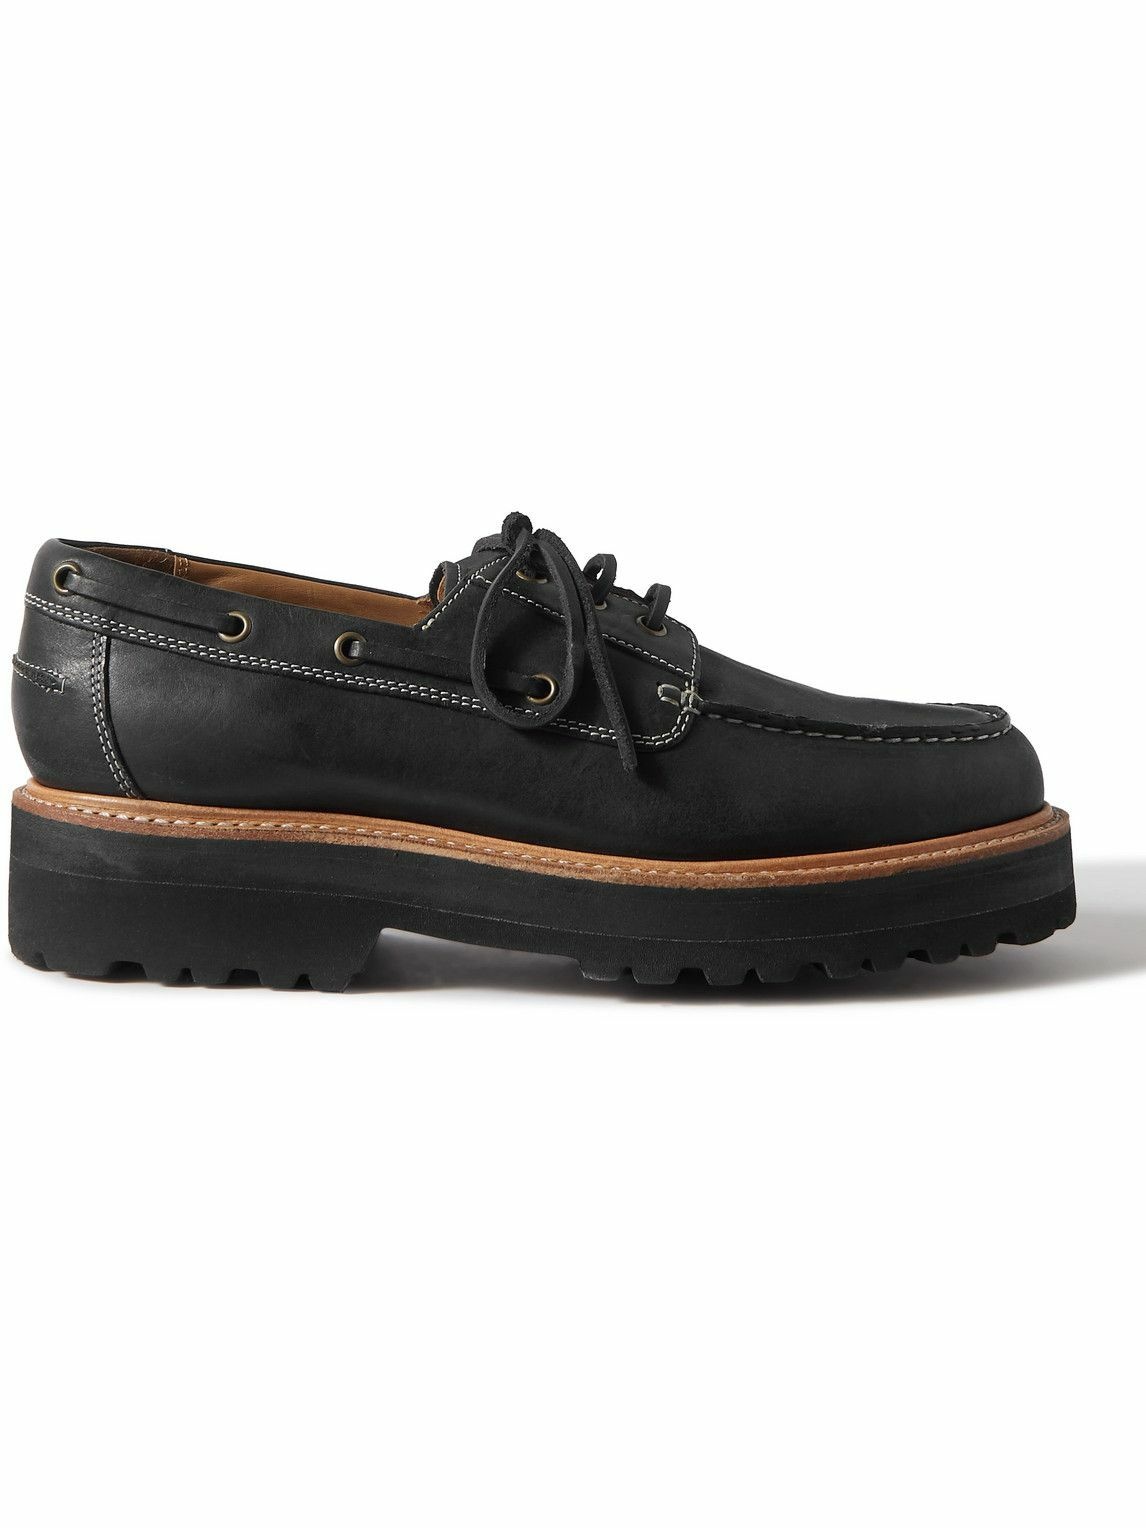 Photo: Grenson - Demspey Leather Boat Shoes - Black